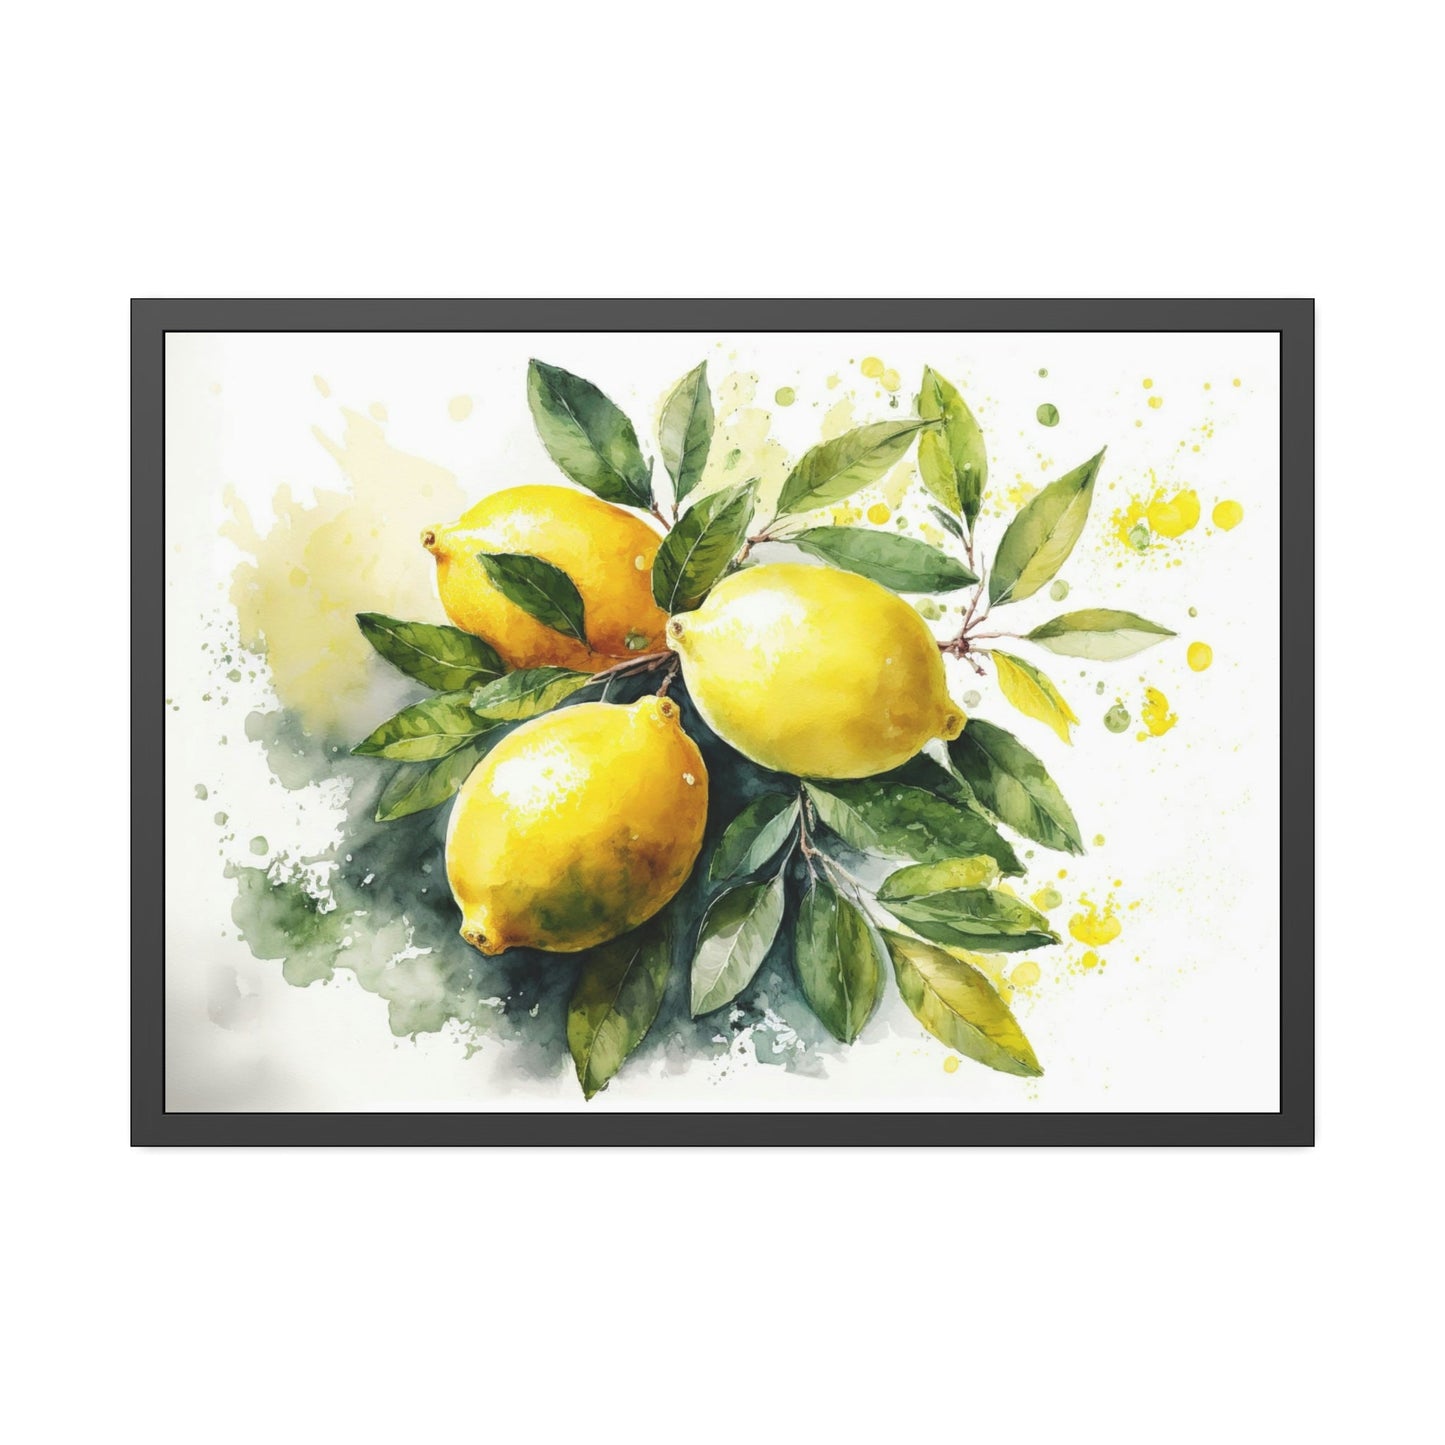 Tropical Citrus: Vibrant and Bold Wall Art Prints of Yellow Lemons on Natural Canvas & Posters